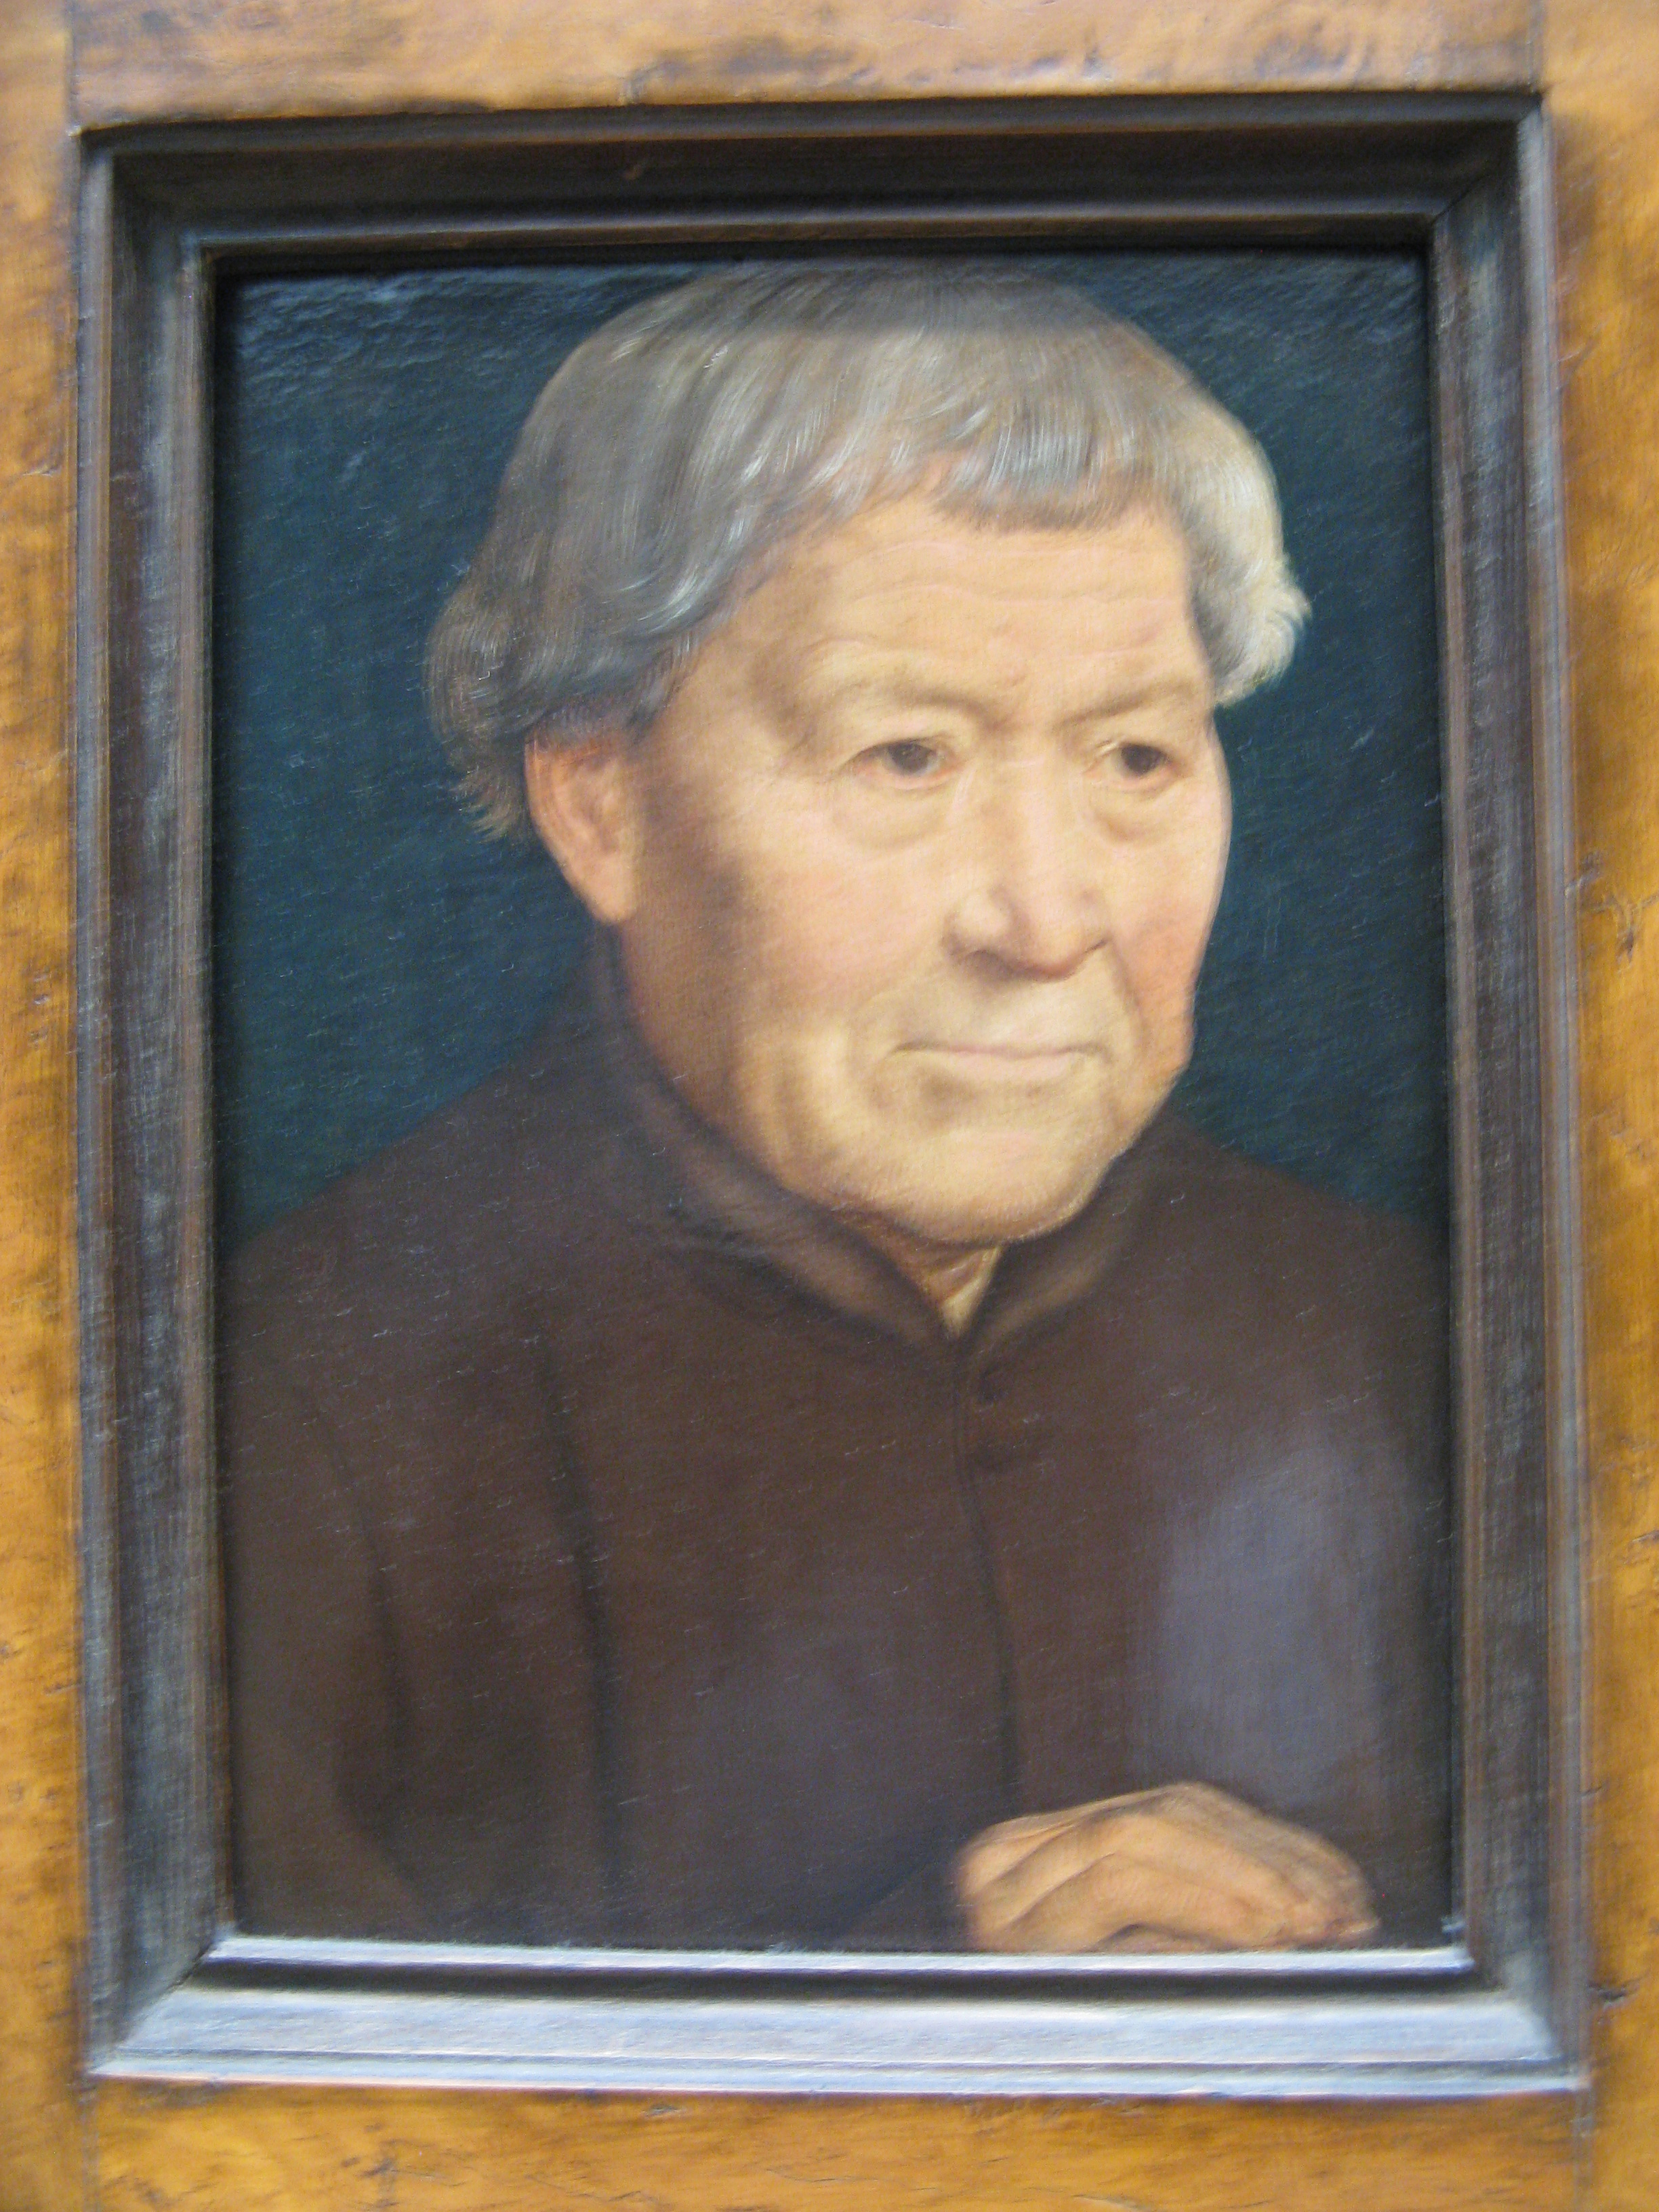 File:Old man face.jpg - Wikimedia Commons